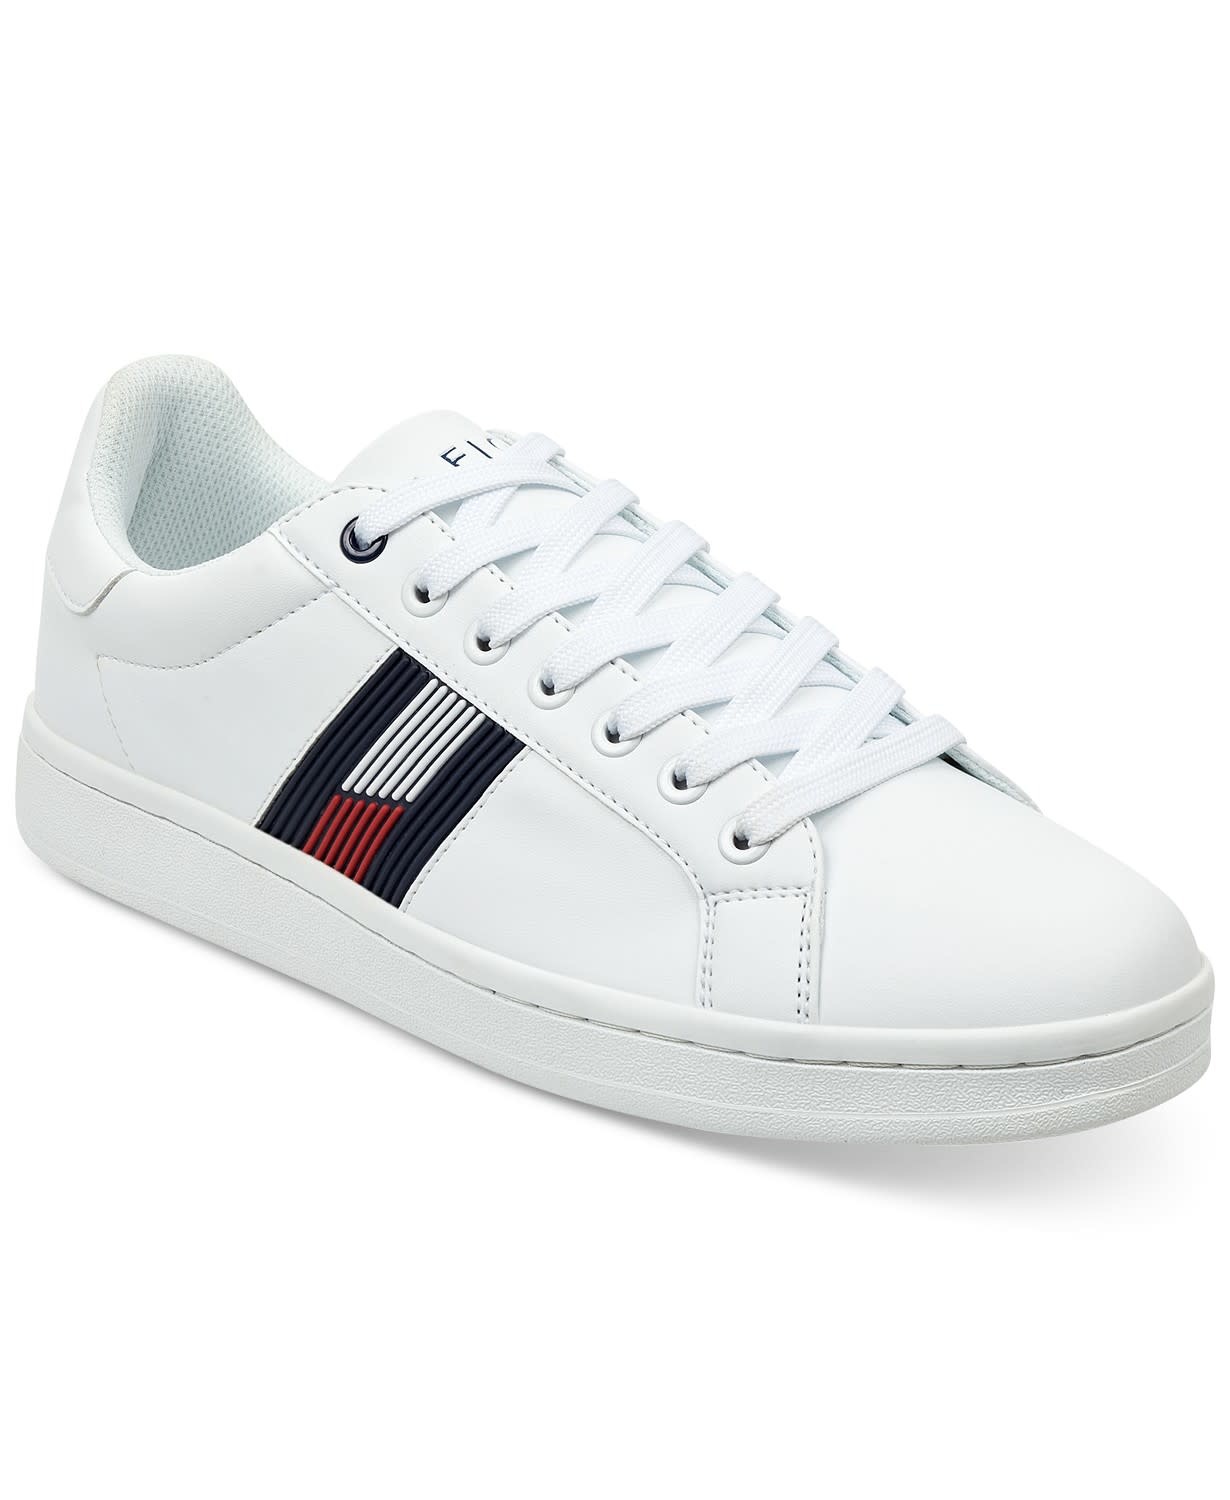 Tommy Hilfiger H-LAKELY WHILL Men's 